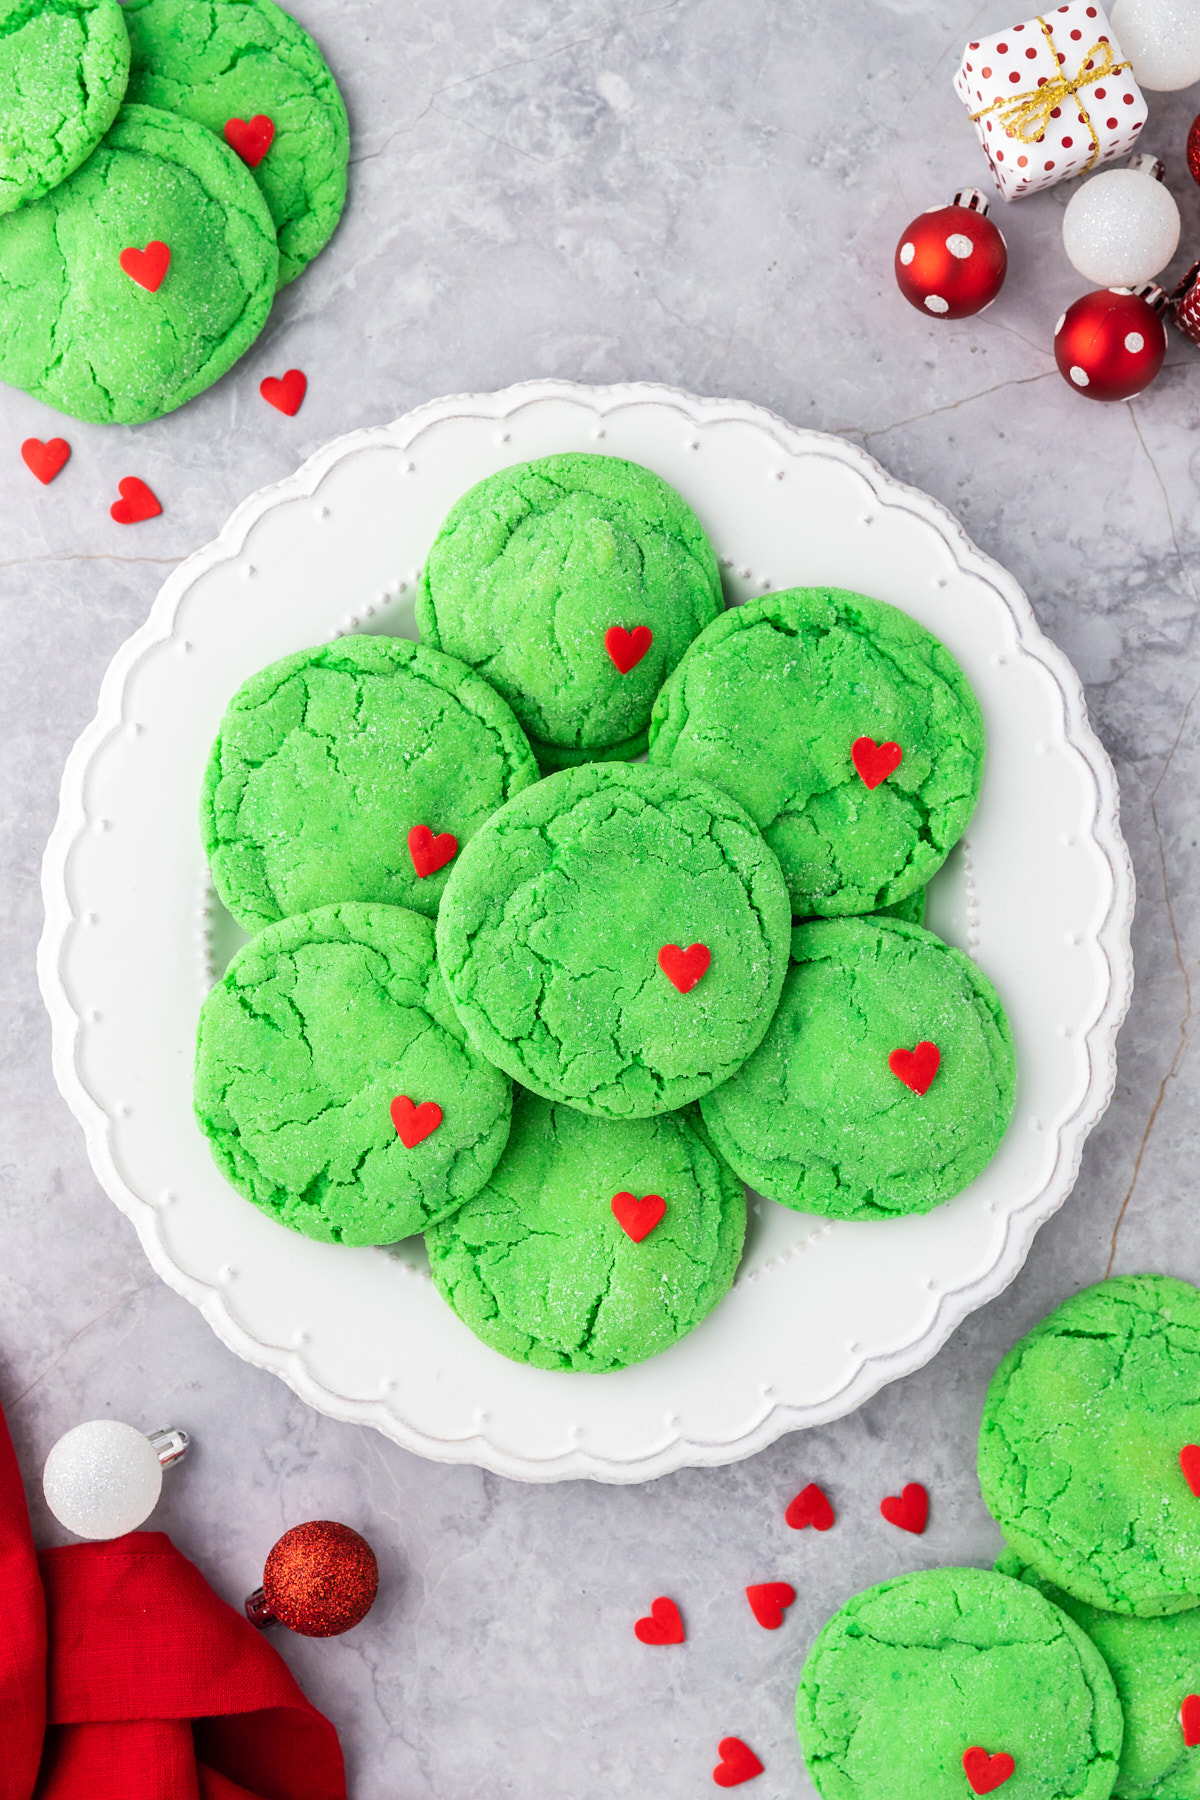 Make these delicious Grinch sugar cookies this holiday season! This easy-to-follow recipe is sure to make your Christmas even merrier.